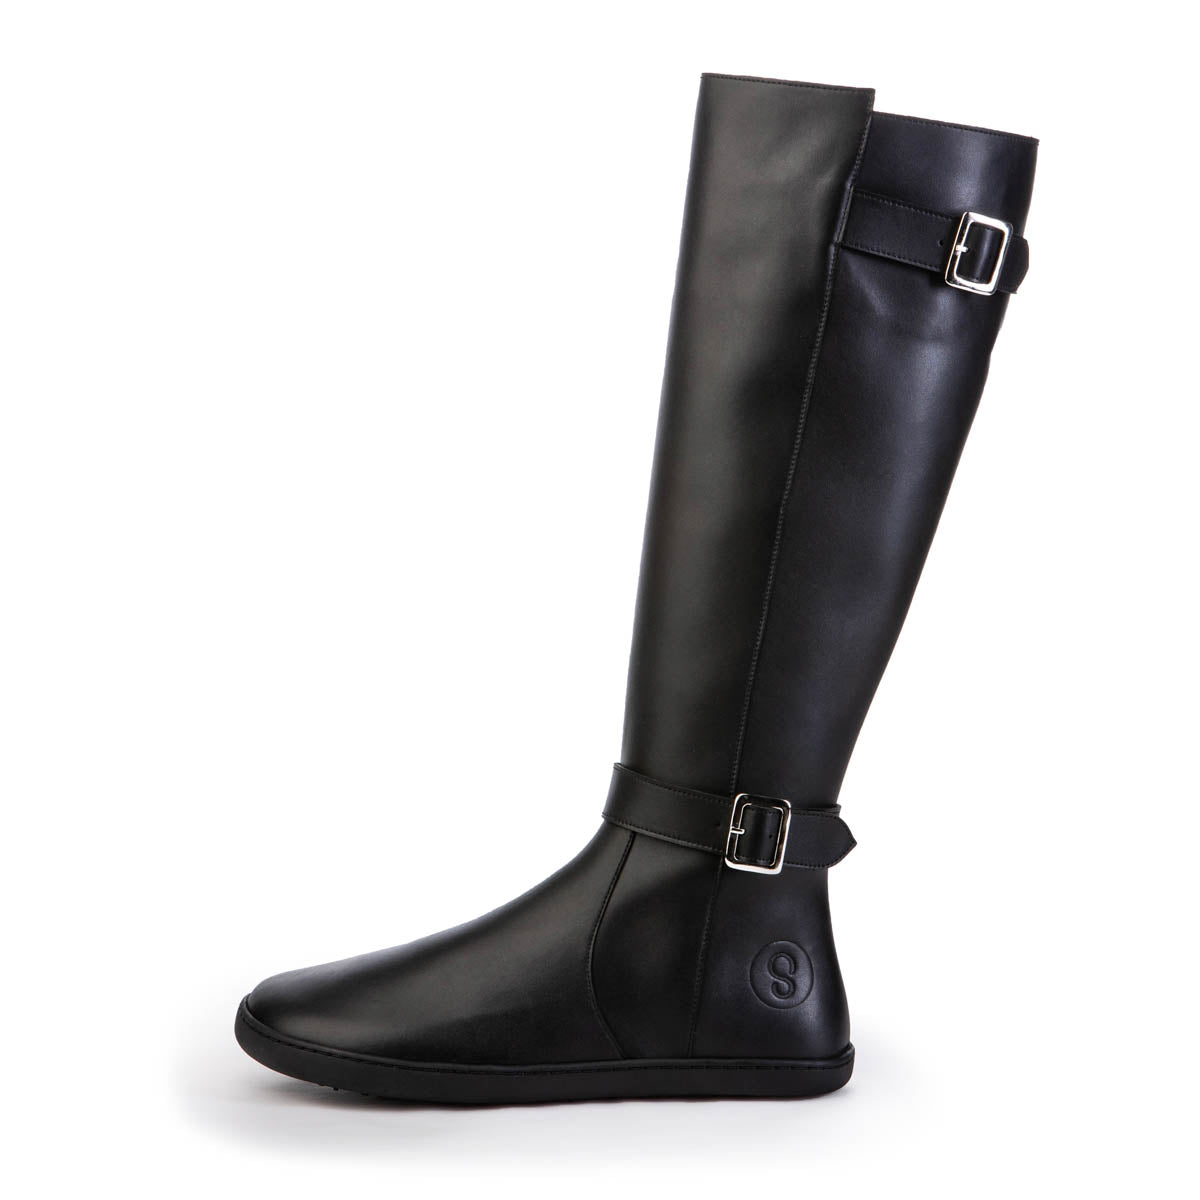 A photo of Shapen Glam lined riding boots made with leather, a faux fur lining, and rubber soles. The boots are black in color with silver buckles on the top and around the ankle, the ankle buckle strap is removable. One boot is shown from the left side against a white background. #color_black